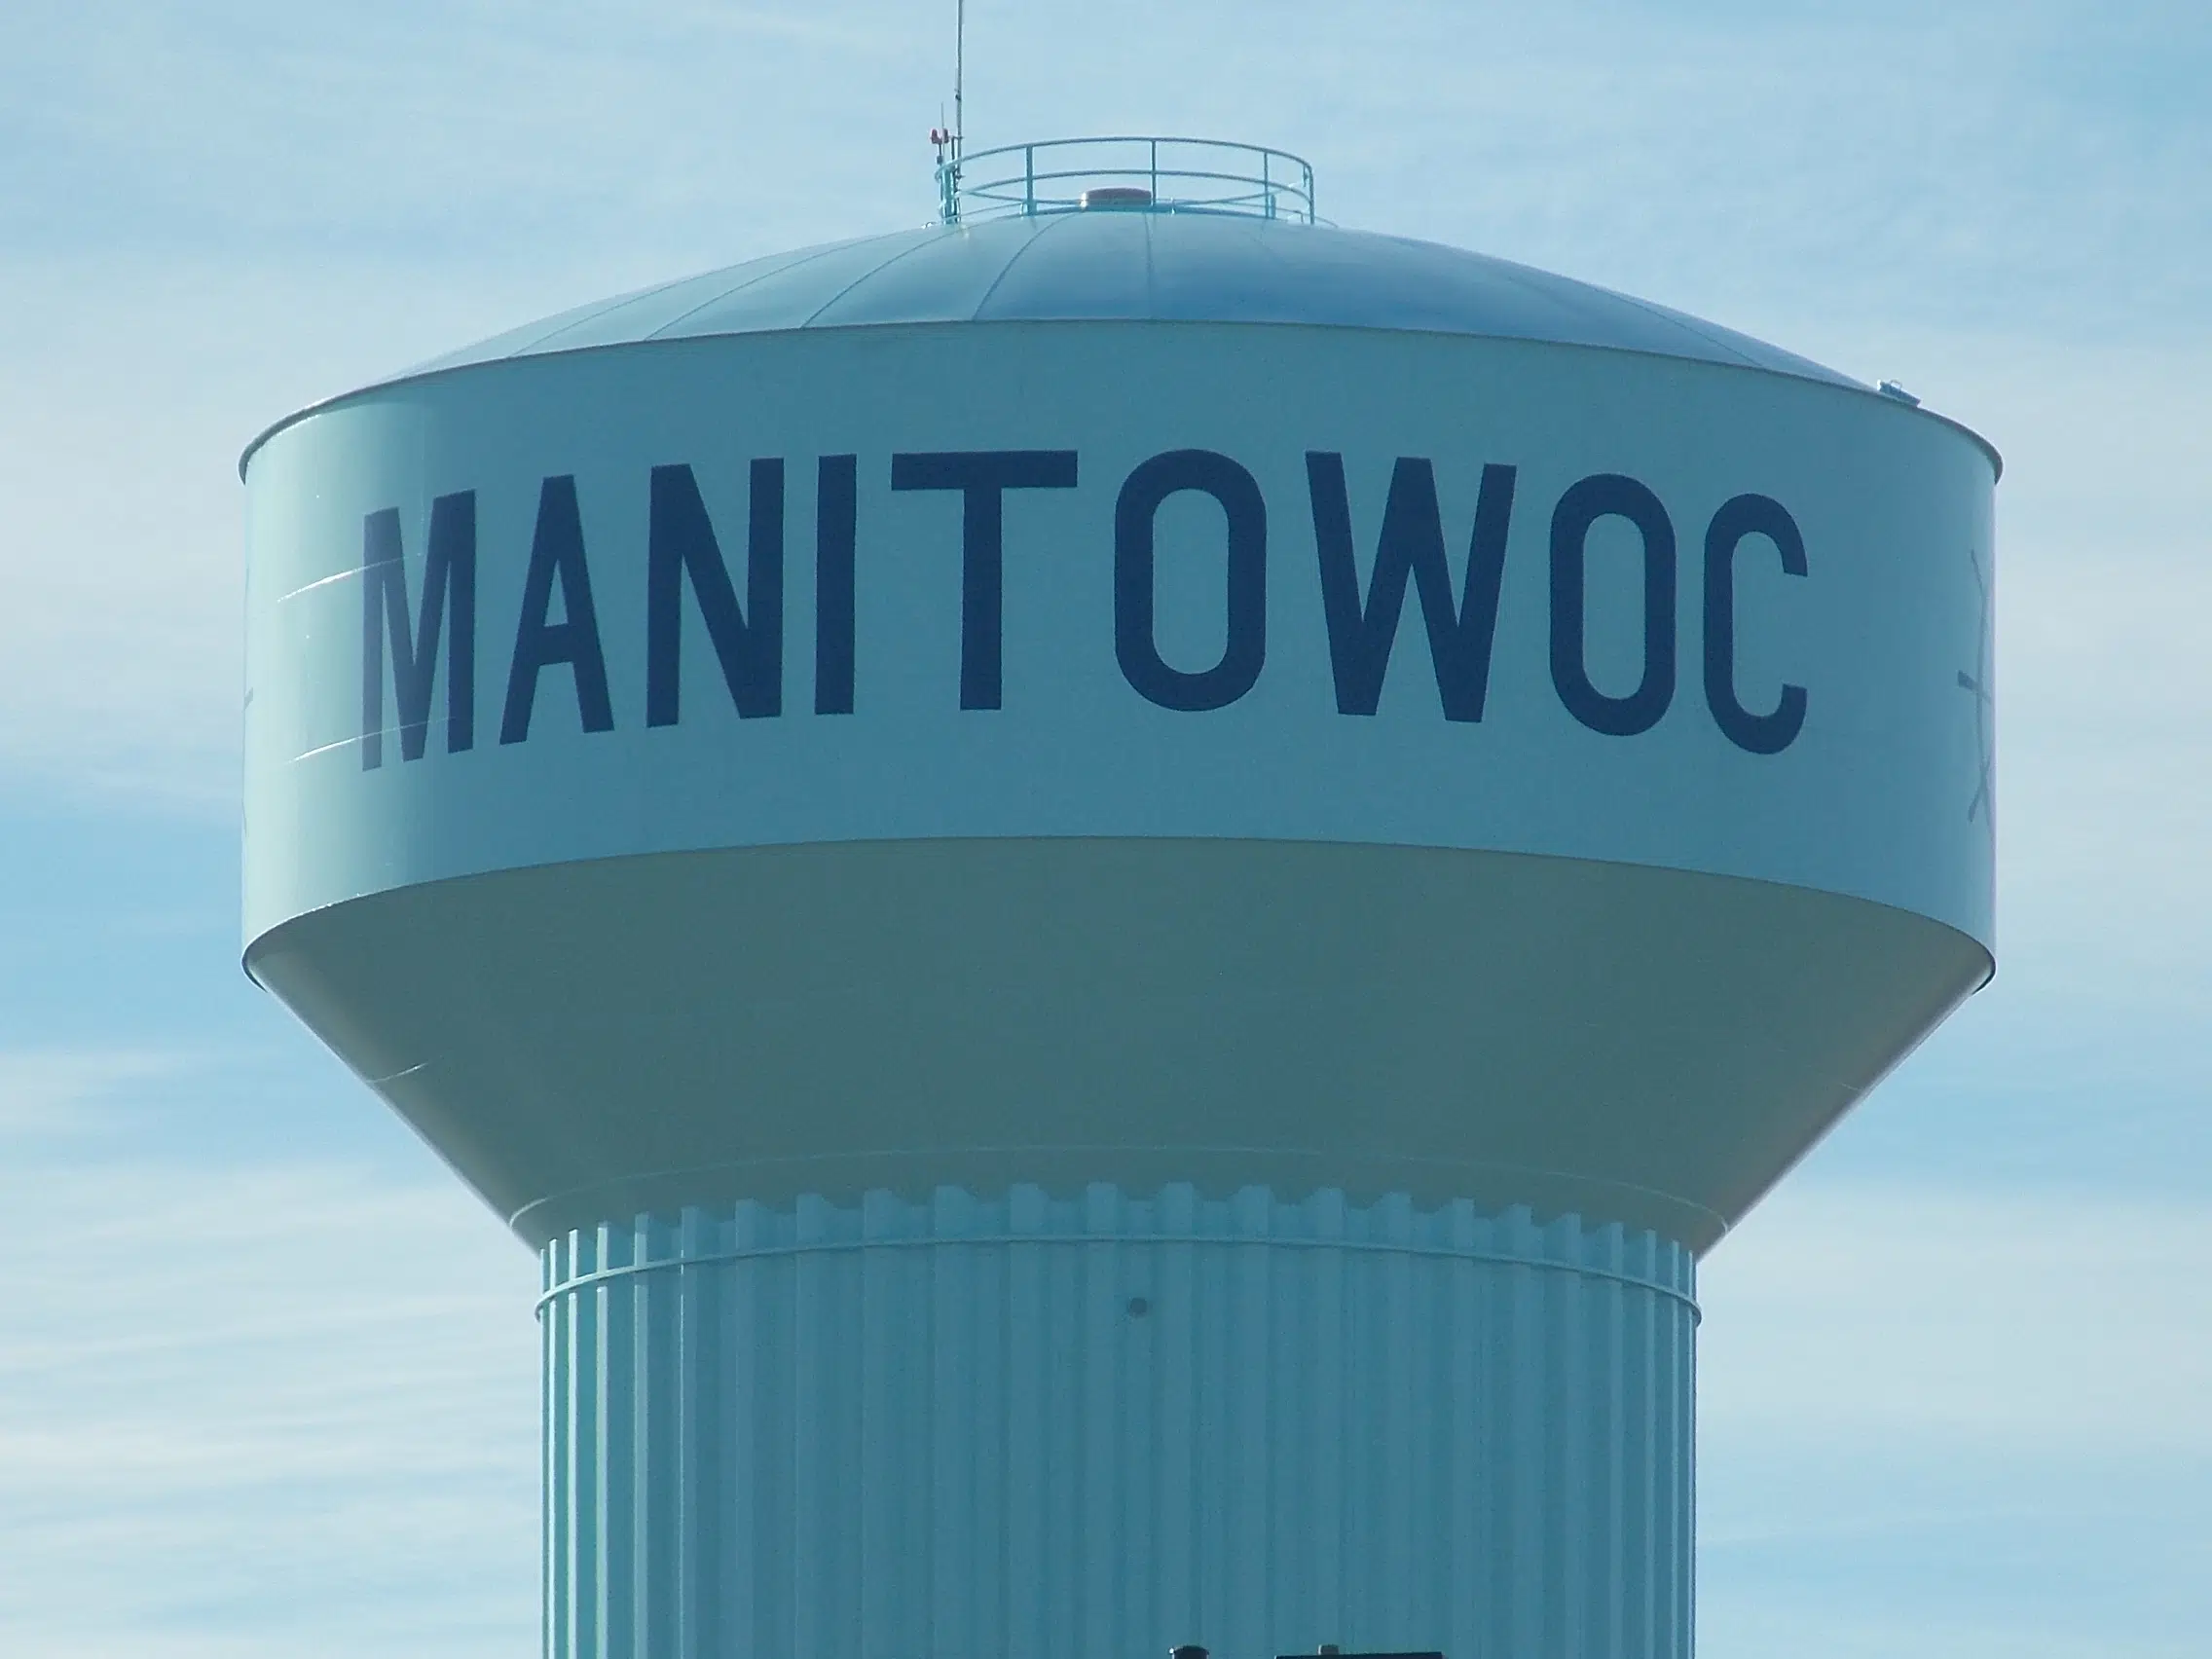 Heavy Winds and Rain Combine to Cause Damage in Manitowoc